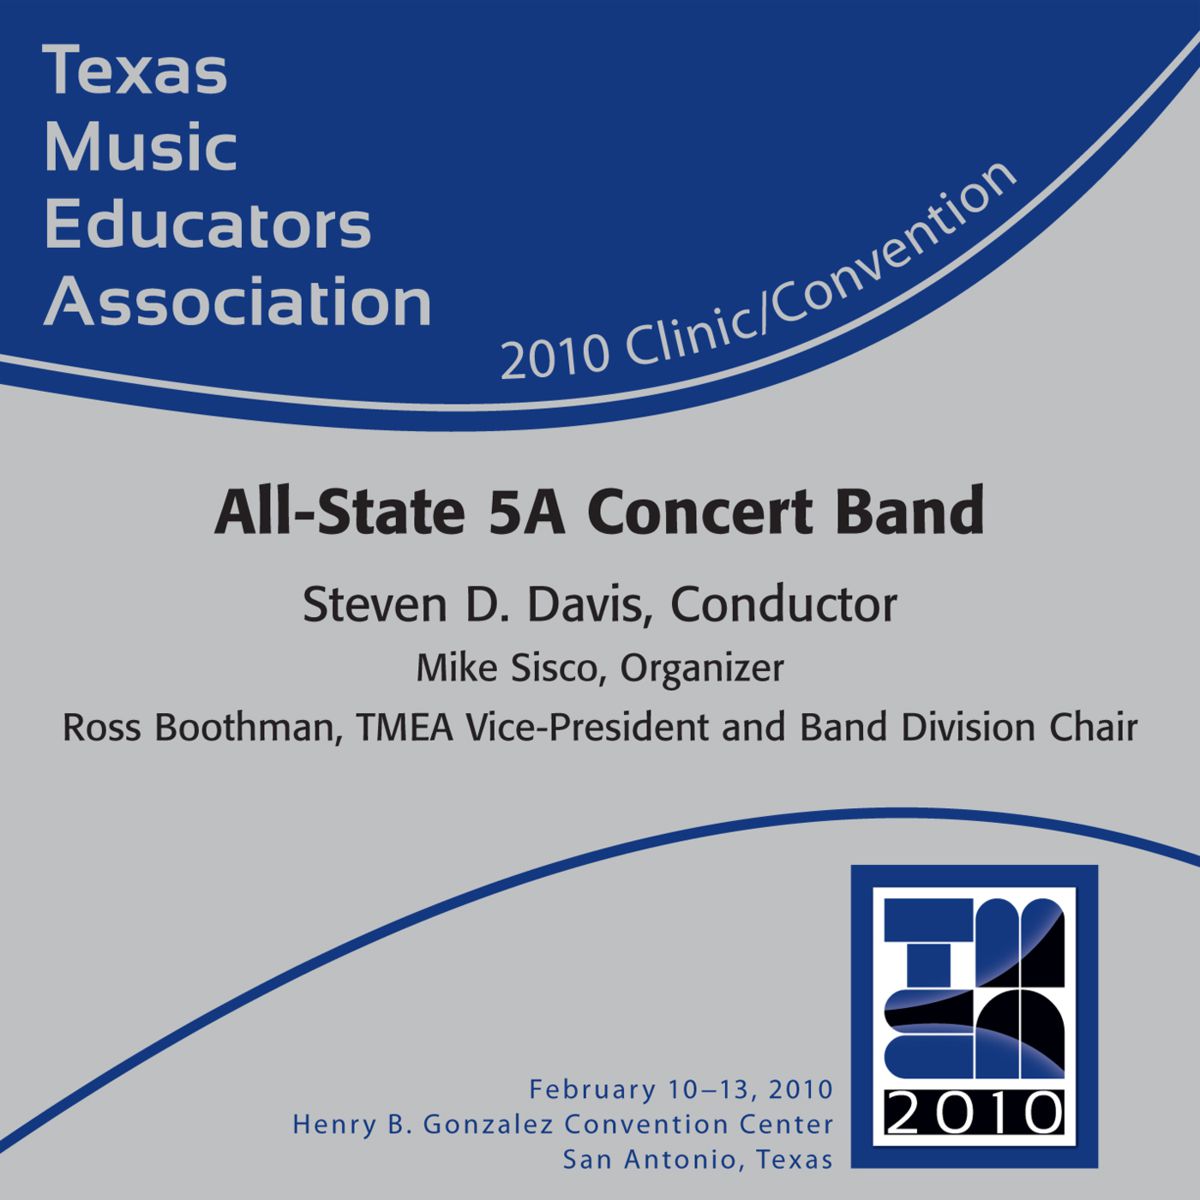 2010 Texas Music Educators Association: All-State 5A Concert Band - cliquer ici